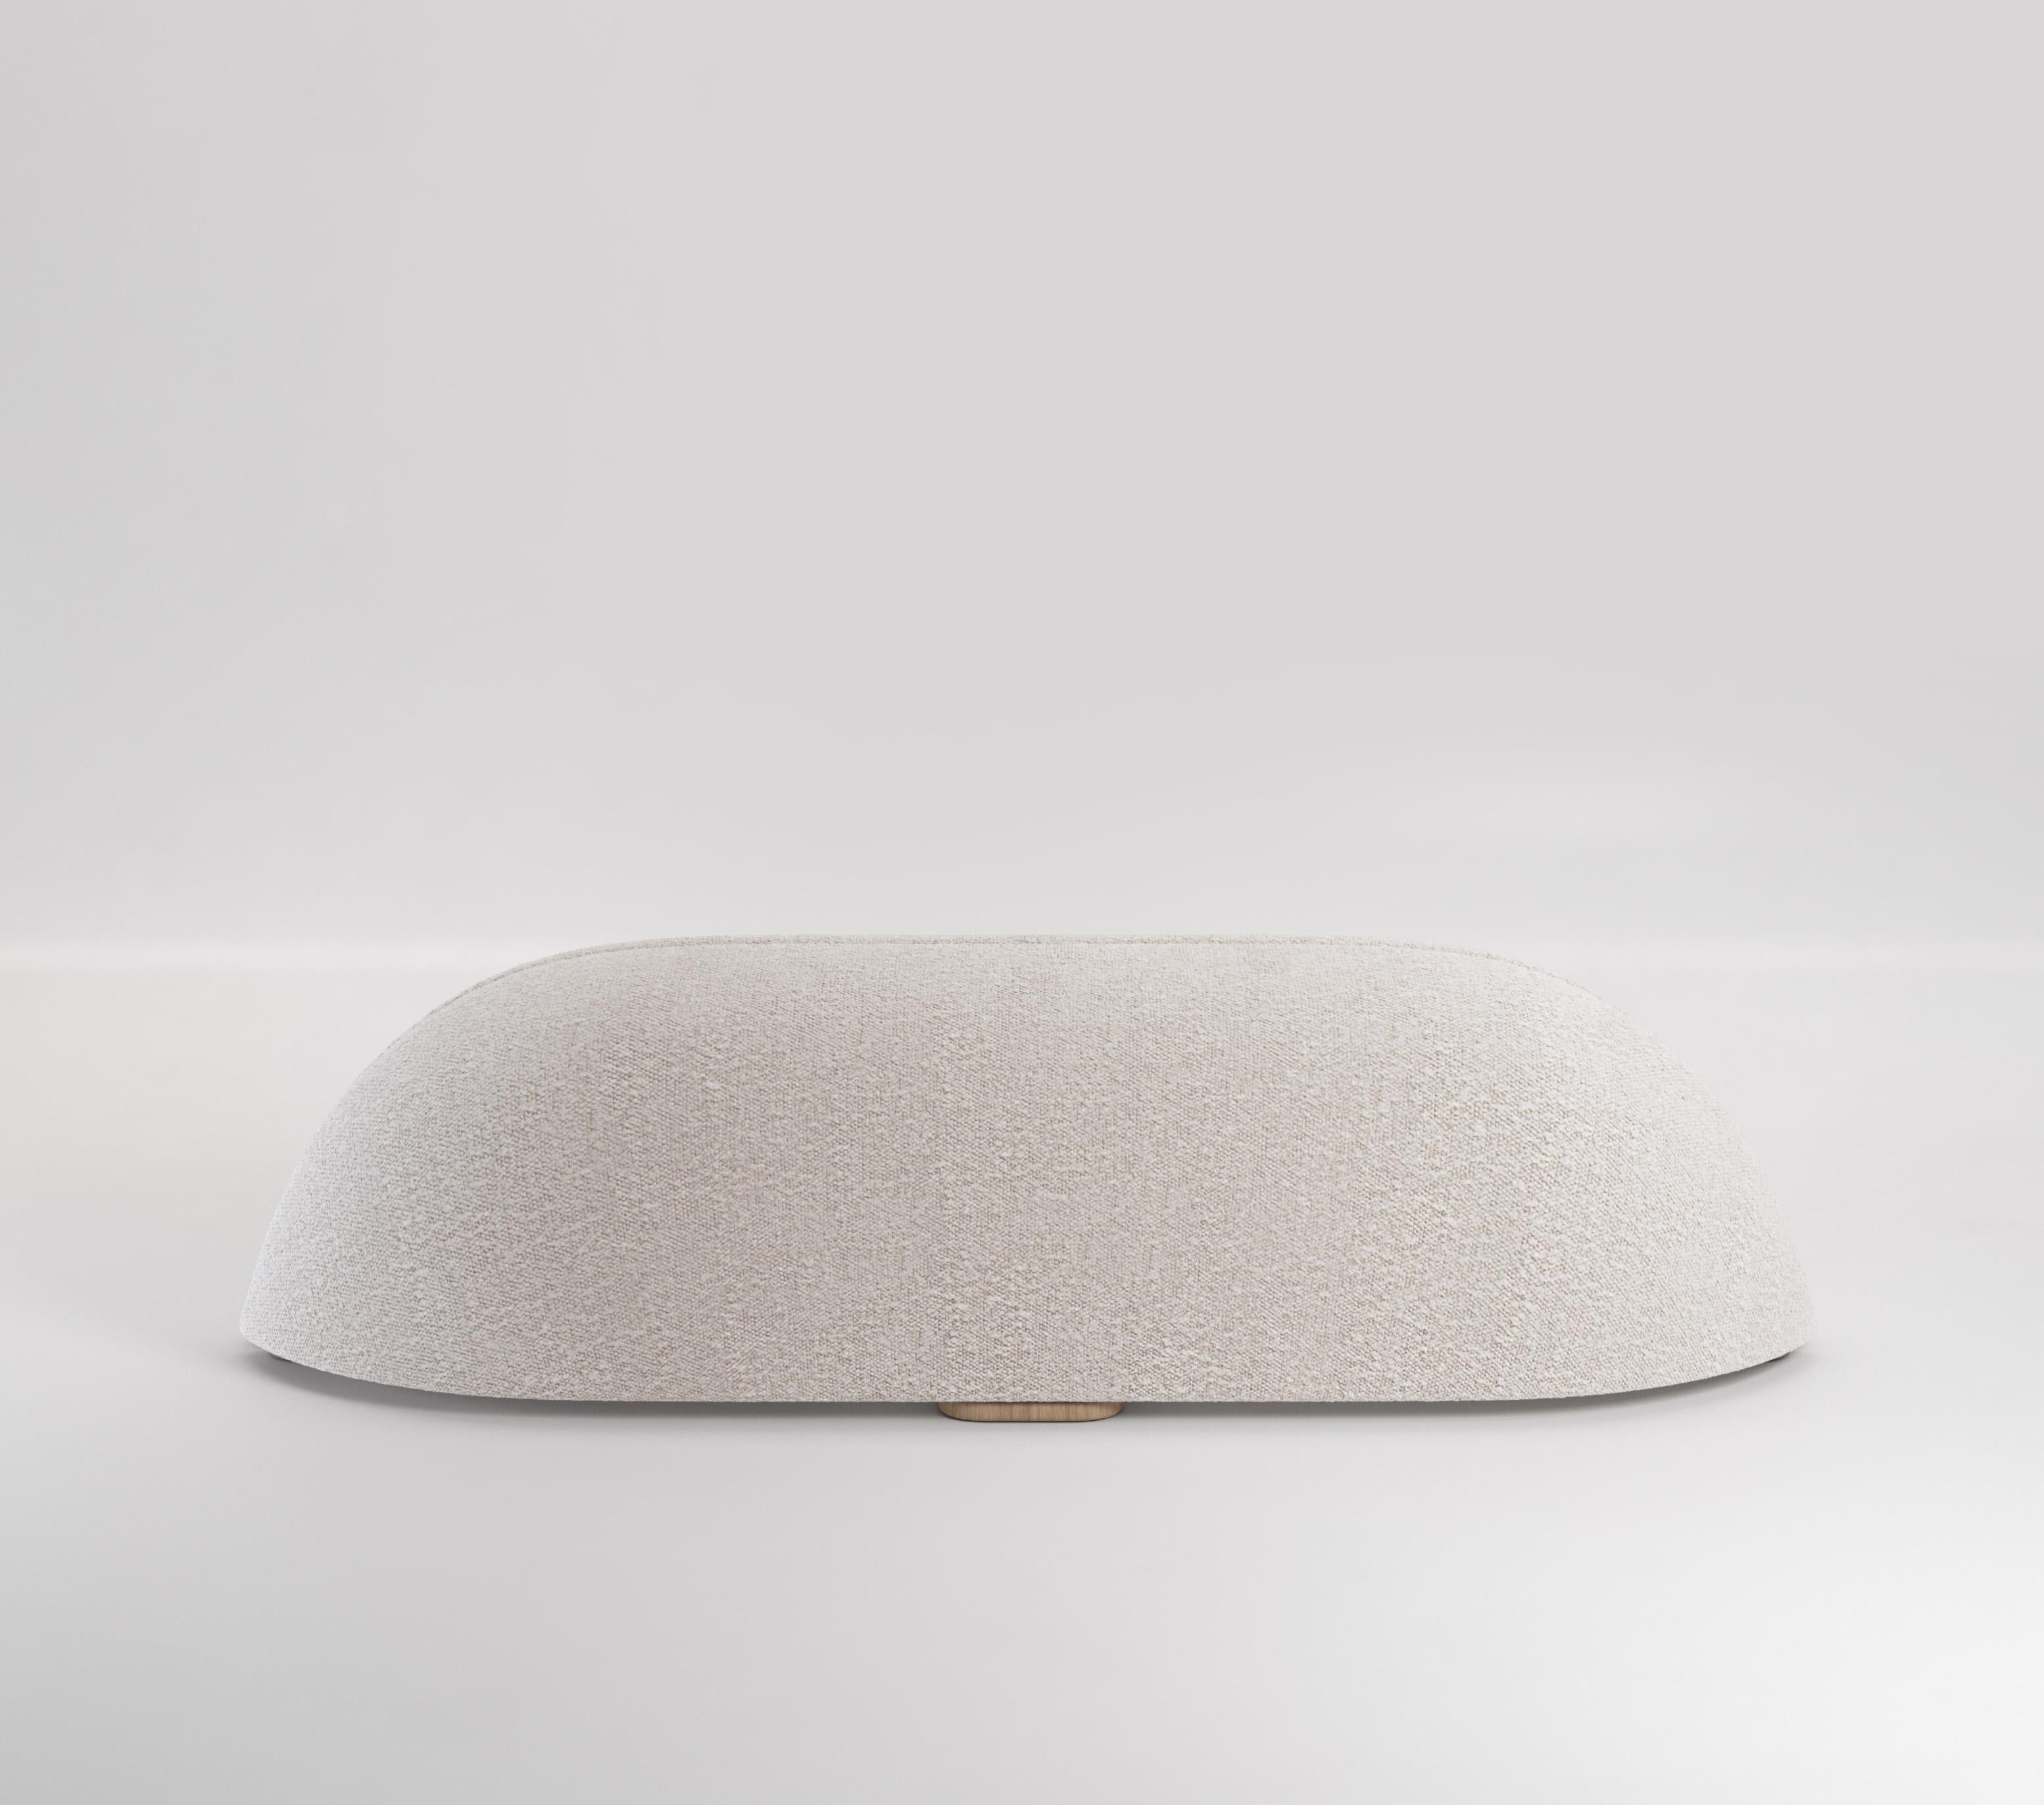 The Beetle bench is a soft and inviting bench perfect for a living space, bedroom or hallway. The unique shape of Beetle is where it takes its name, finished with only a large seam down the middle of the piece making it seem like two separate halves